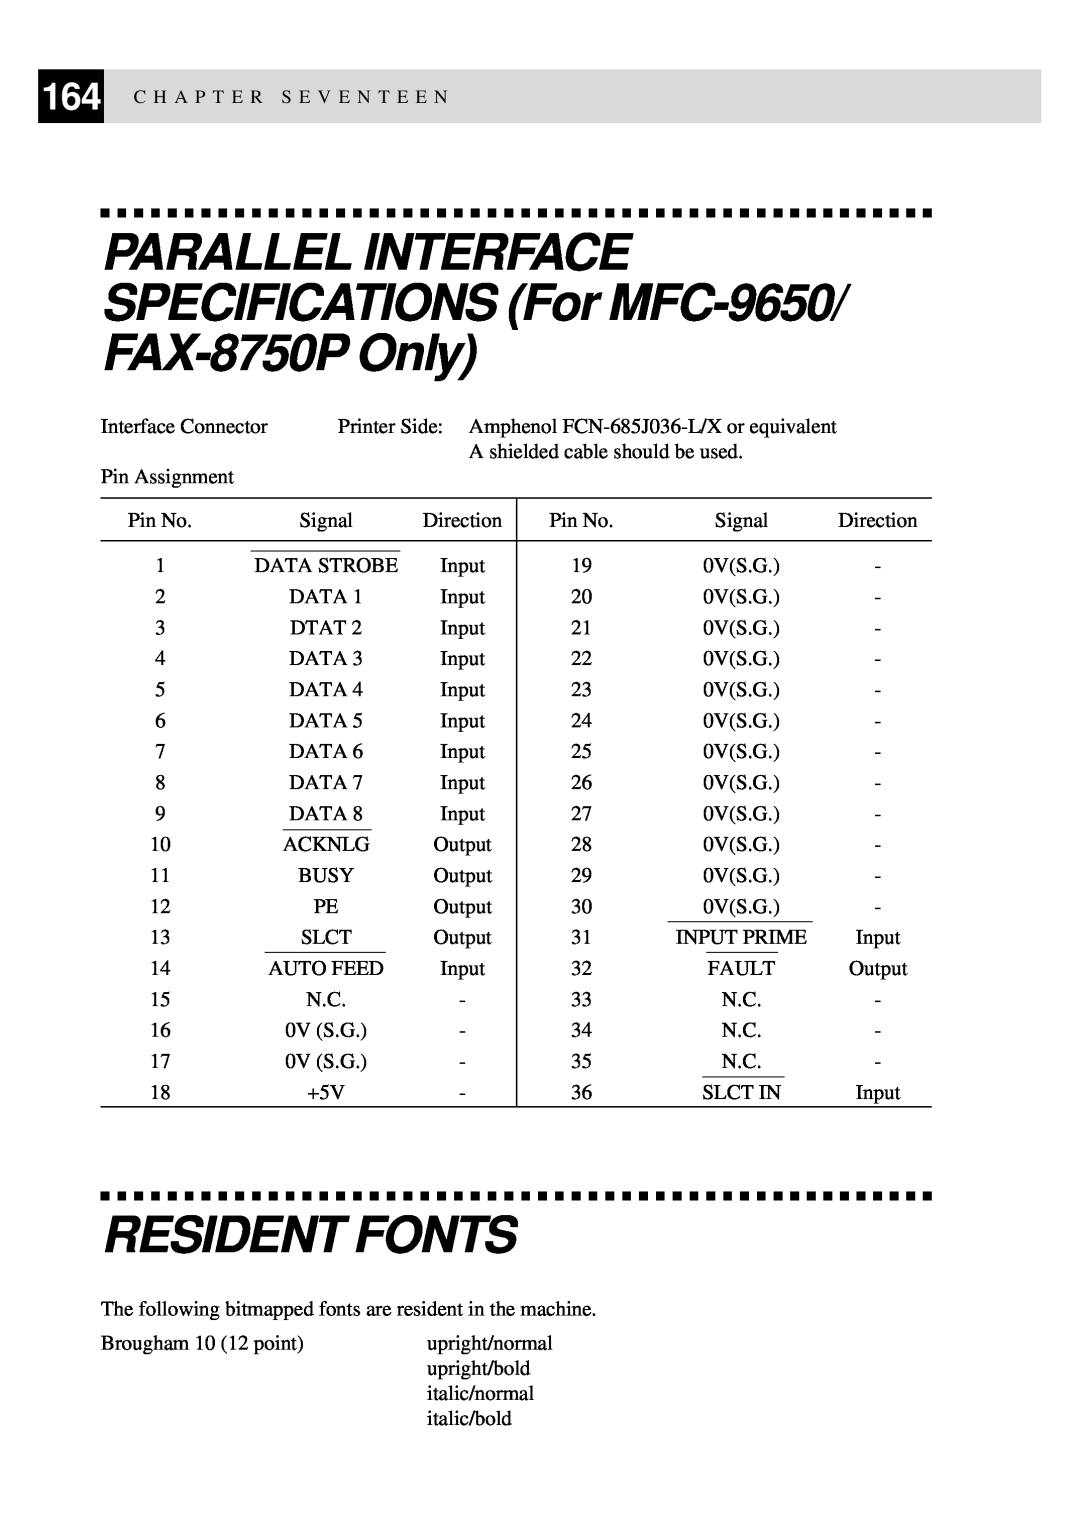 Brother FAX-8350P owner manual PARALLEL INTERFACE SPECIFICATIONS For MFC-9650 FAX-8750P Only, Resident Fonts 